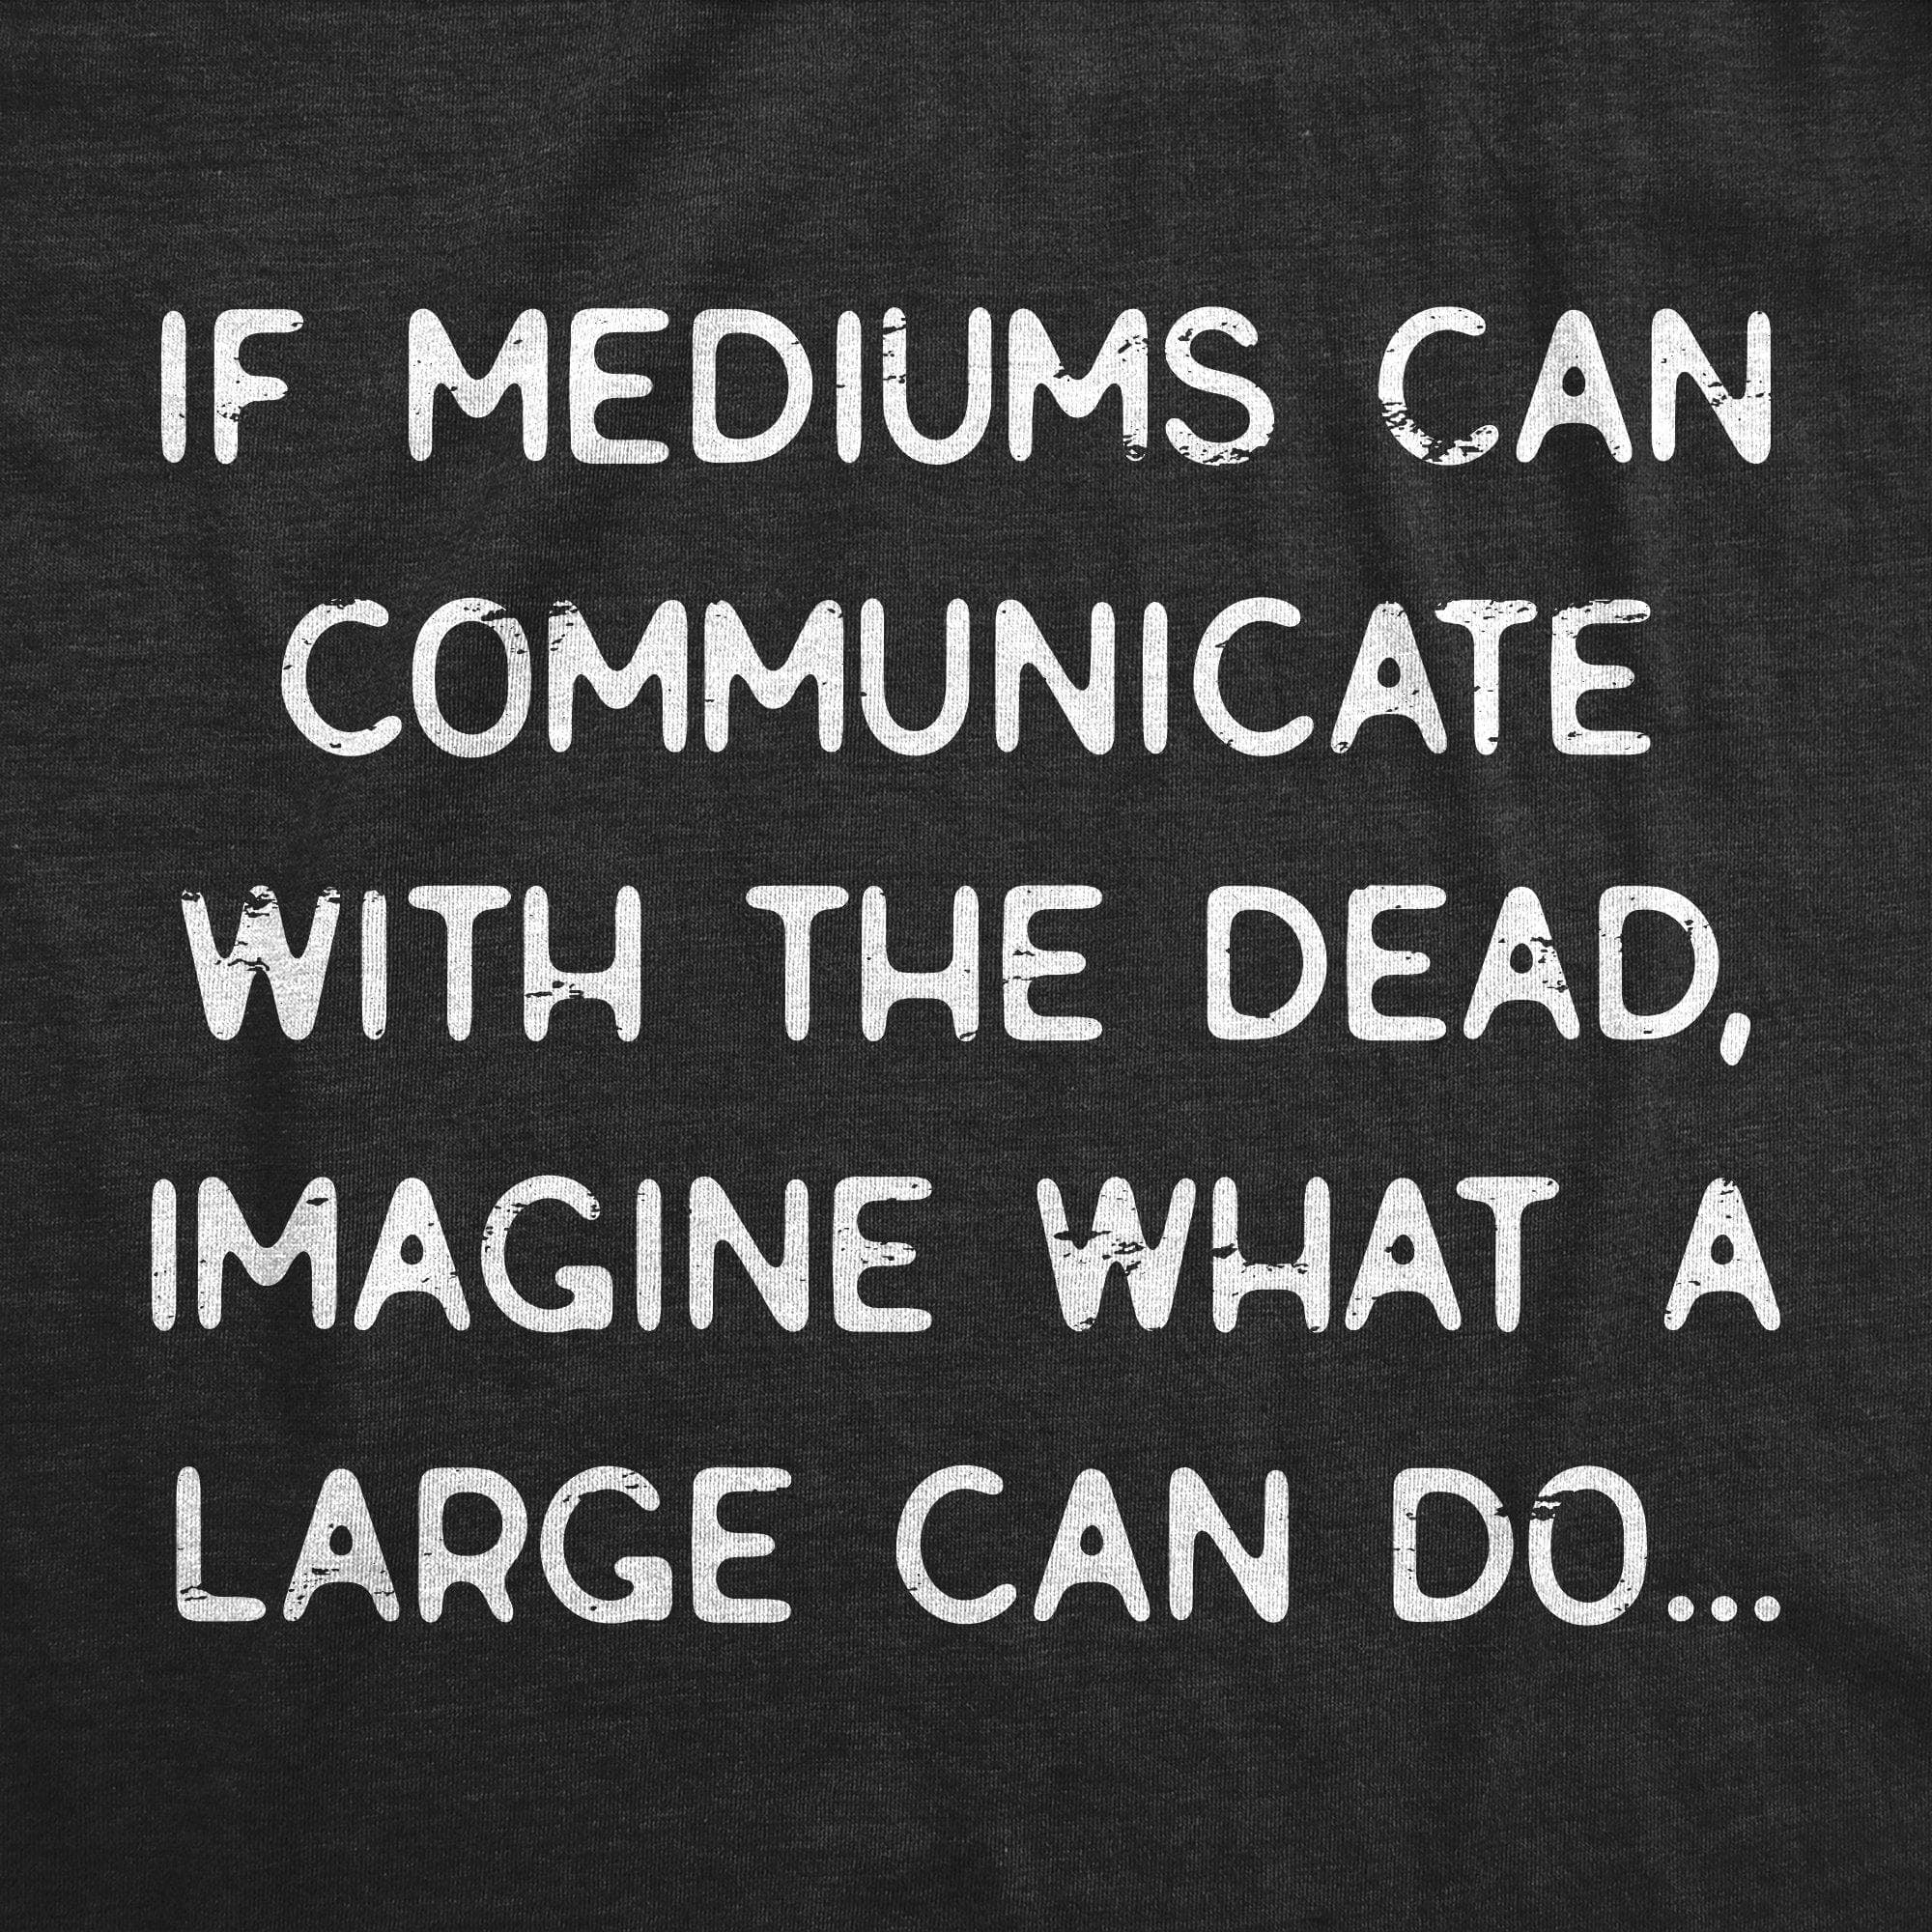 Mediums Can Communicate With The Dead Women's Tshirt - Crazy Dog T-Shirts